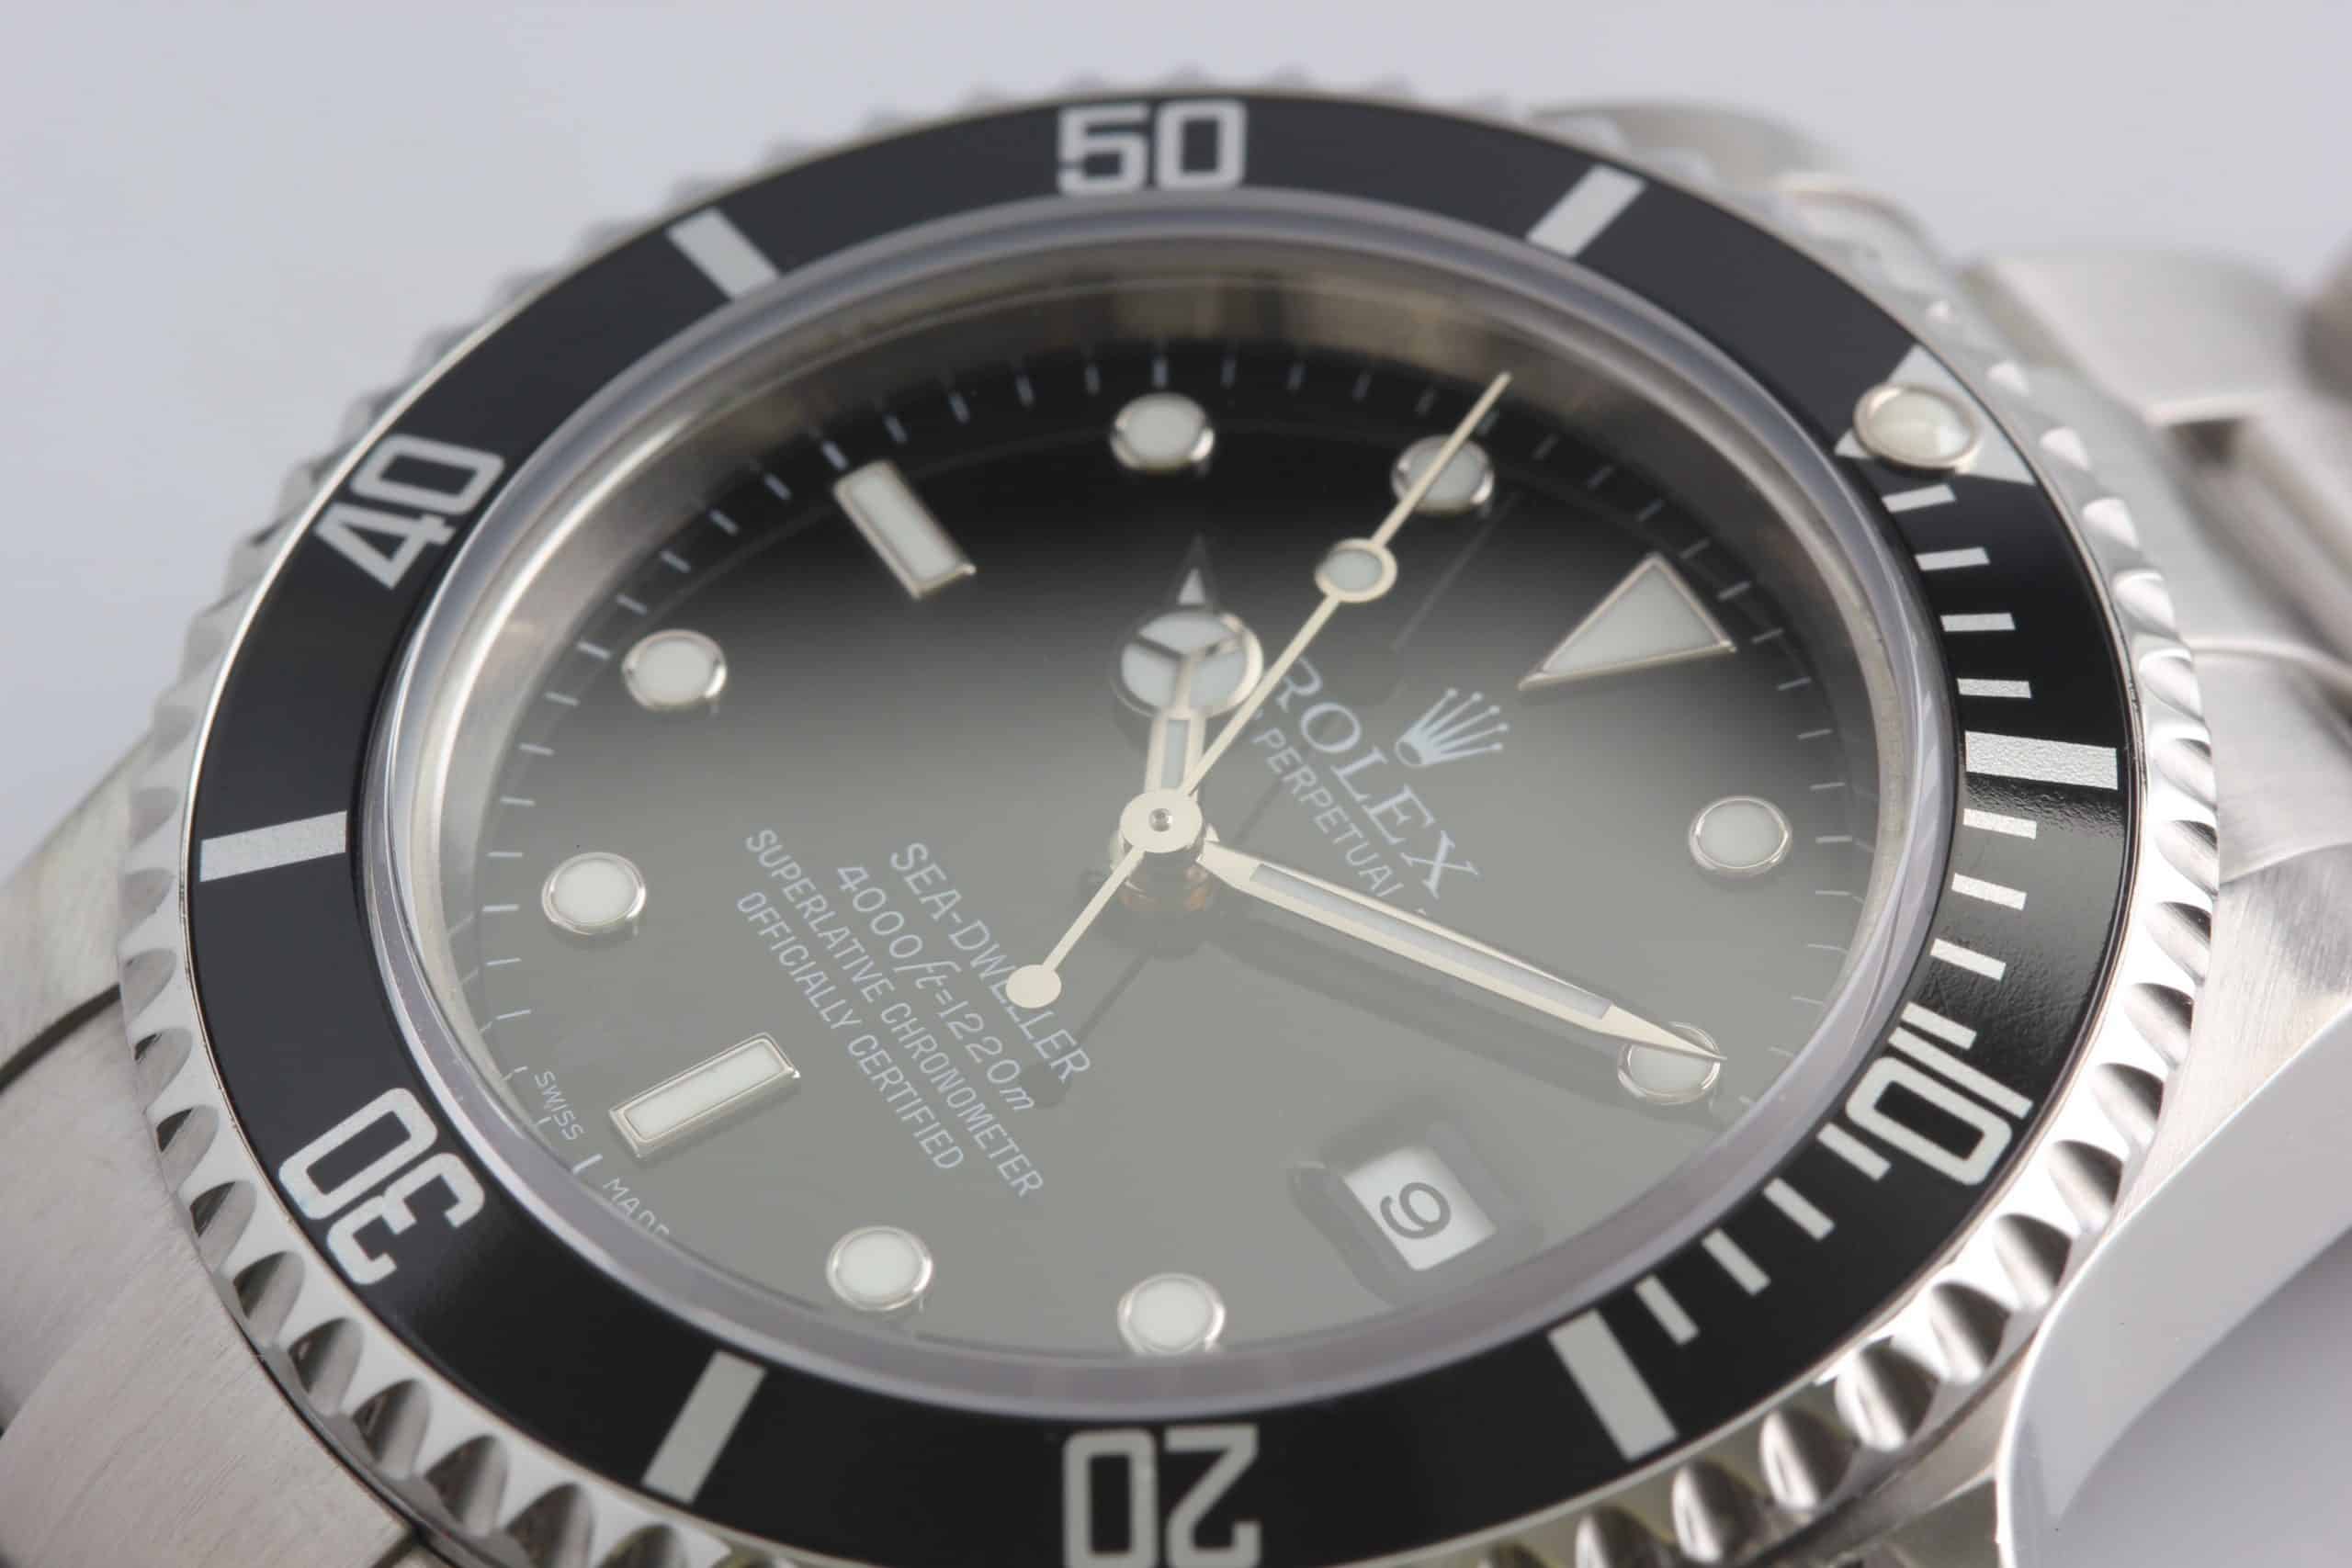 Rolex Sea-Dweller "V SERIES" 2009 - Reference 16600 - VERY RARE!! - SOLD - Seller